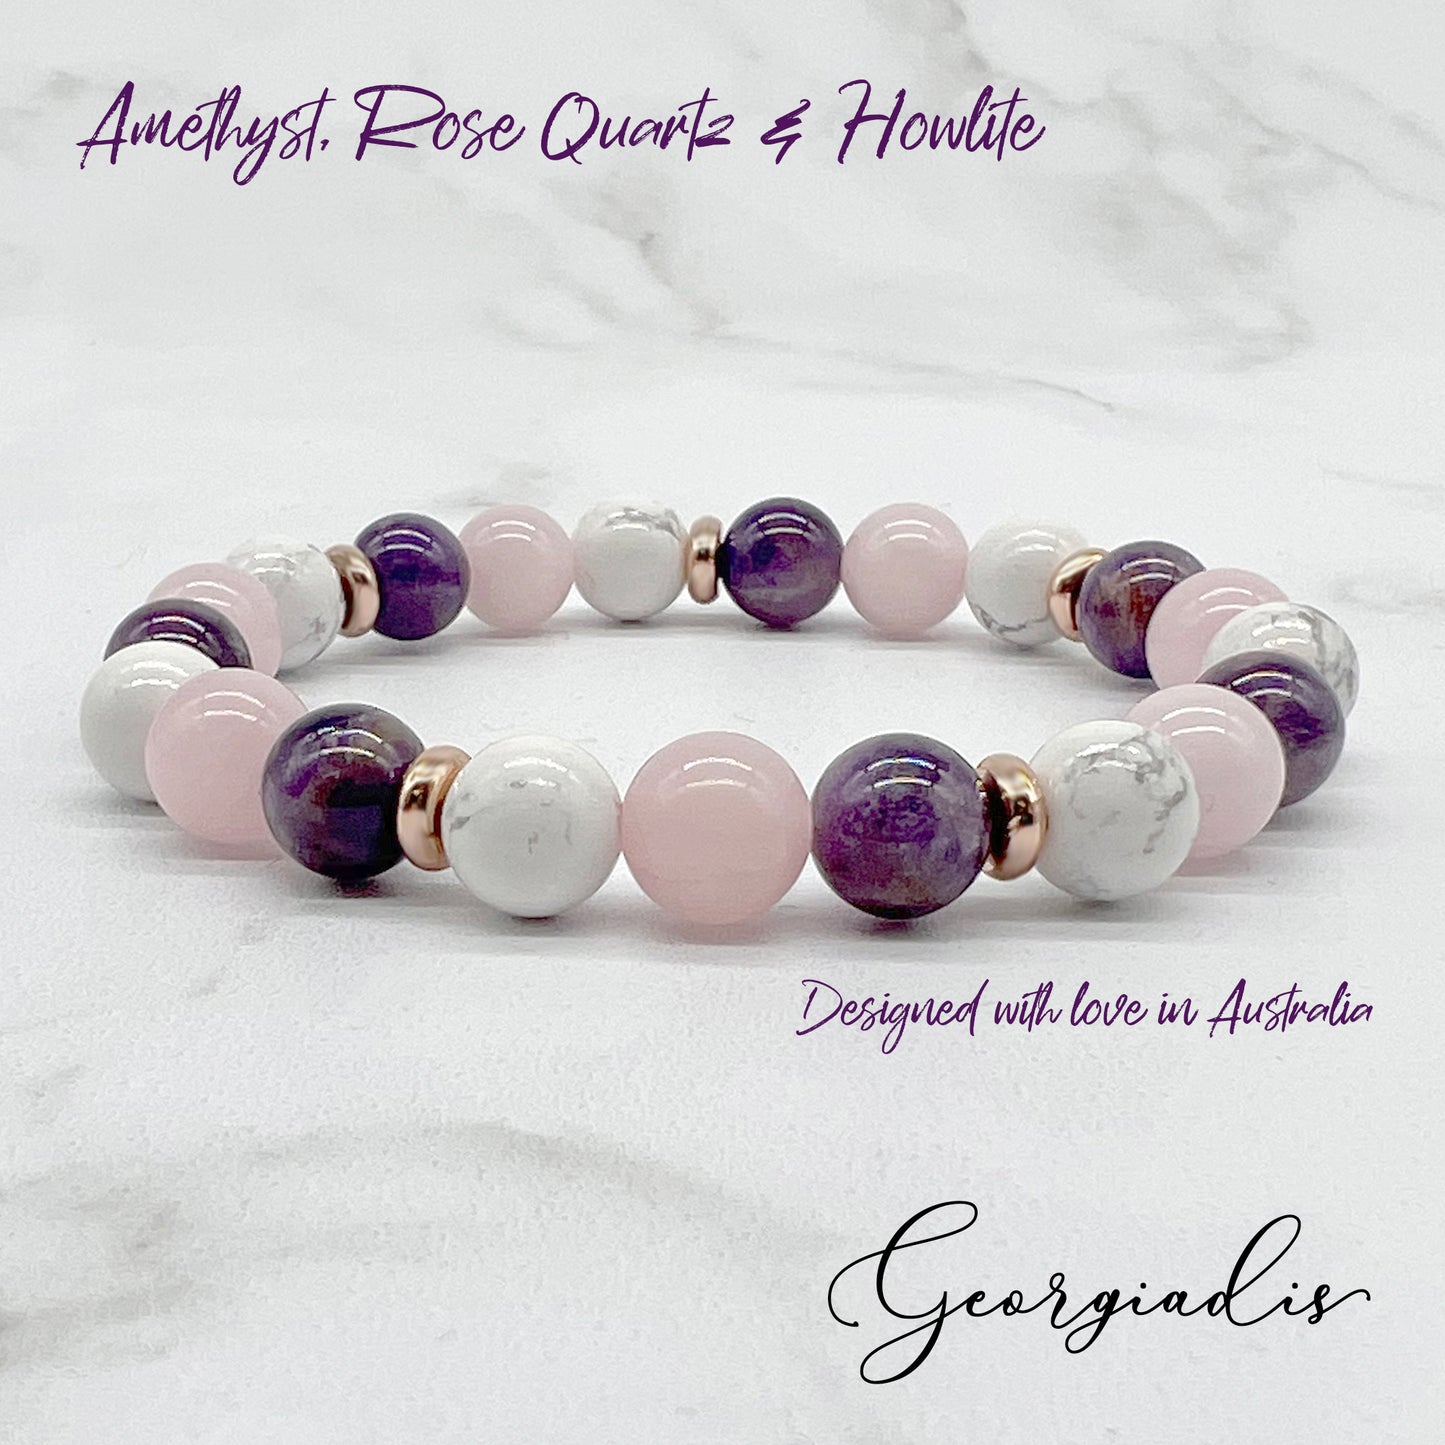 8mm Bead Amethyst, Rose Quartz and Howlite Real Natural Genuine Stones with 18K Gold Plating, Beautiful Gemstone Beads, Healing and Spiritual